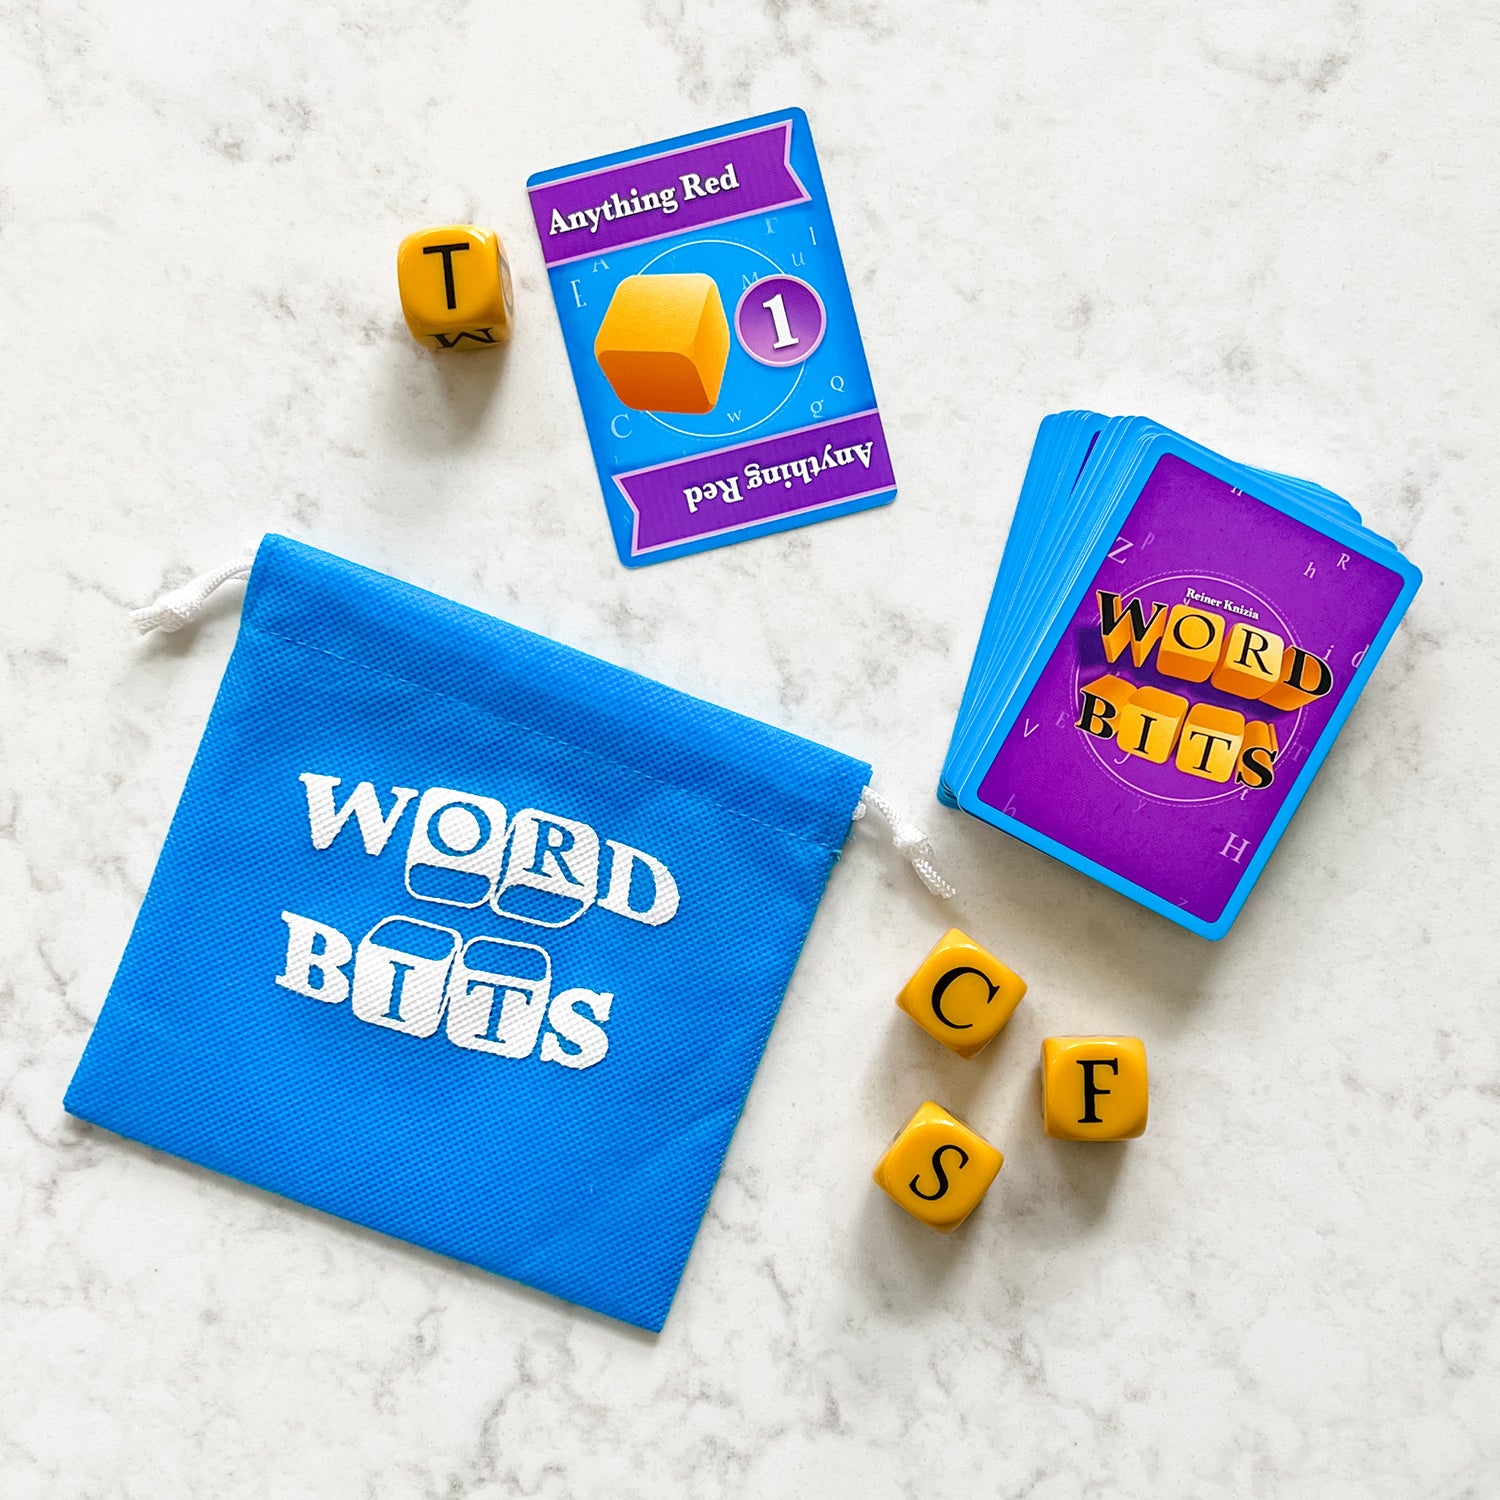 Word Bits by SimplyFun is a word game that focuses on spelling, vocabulary and quick thinking.